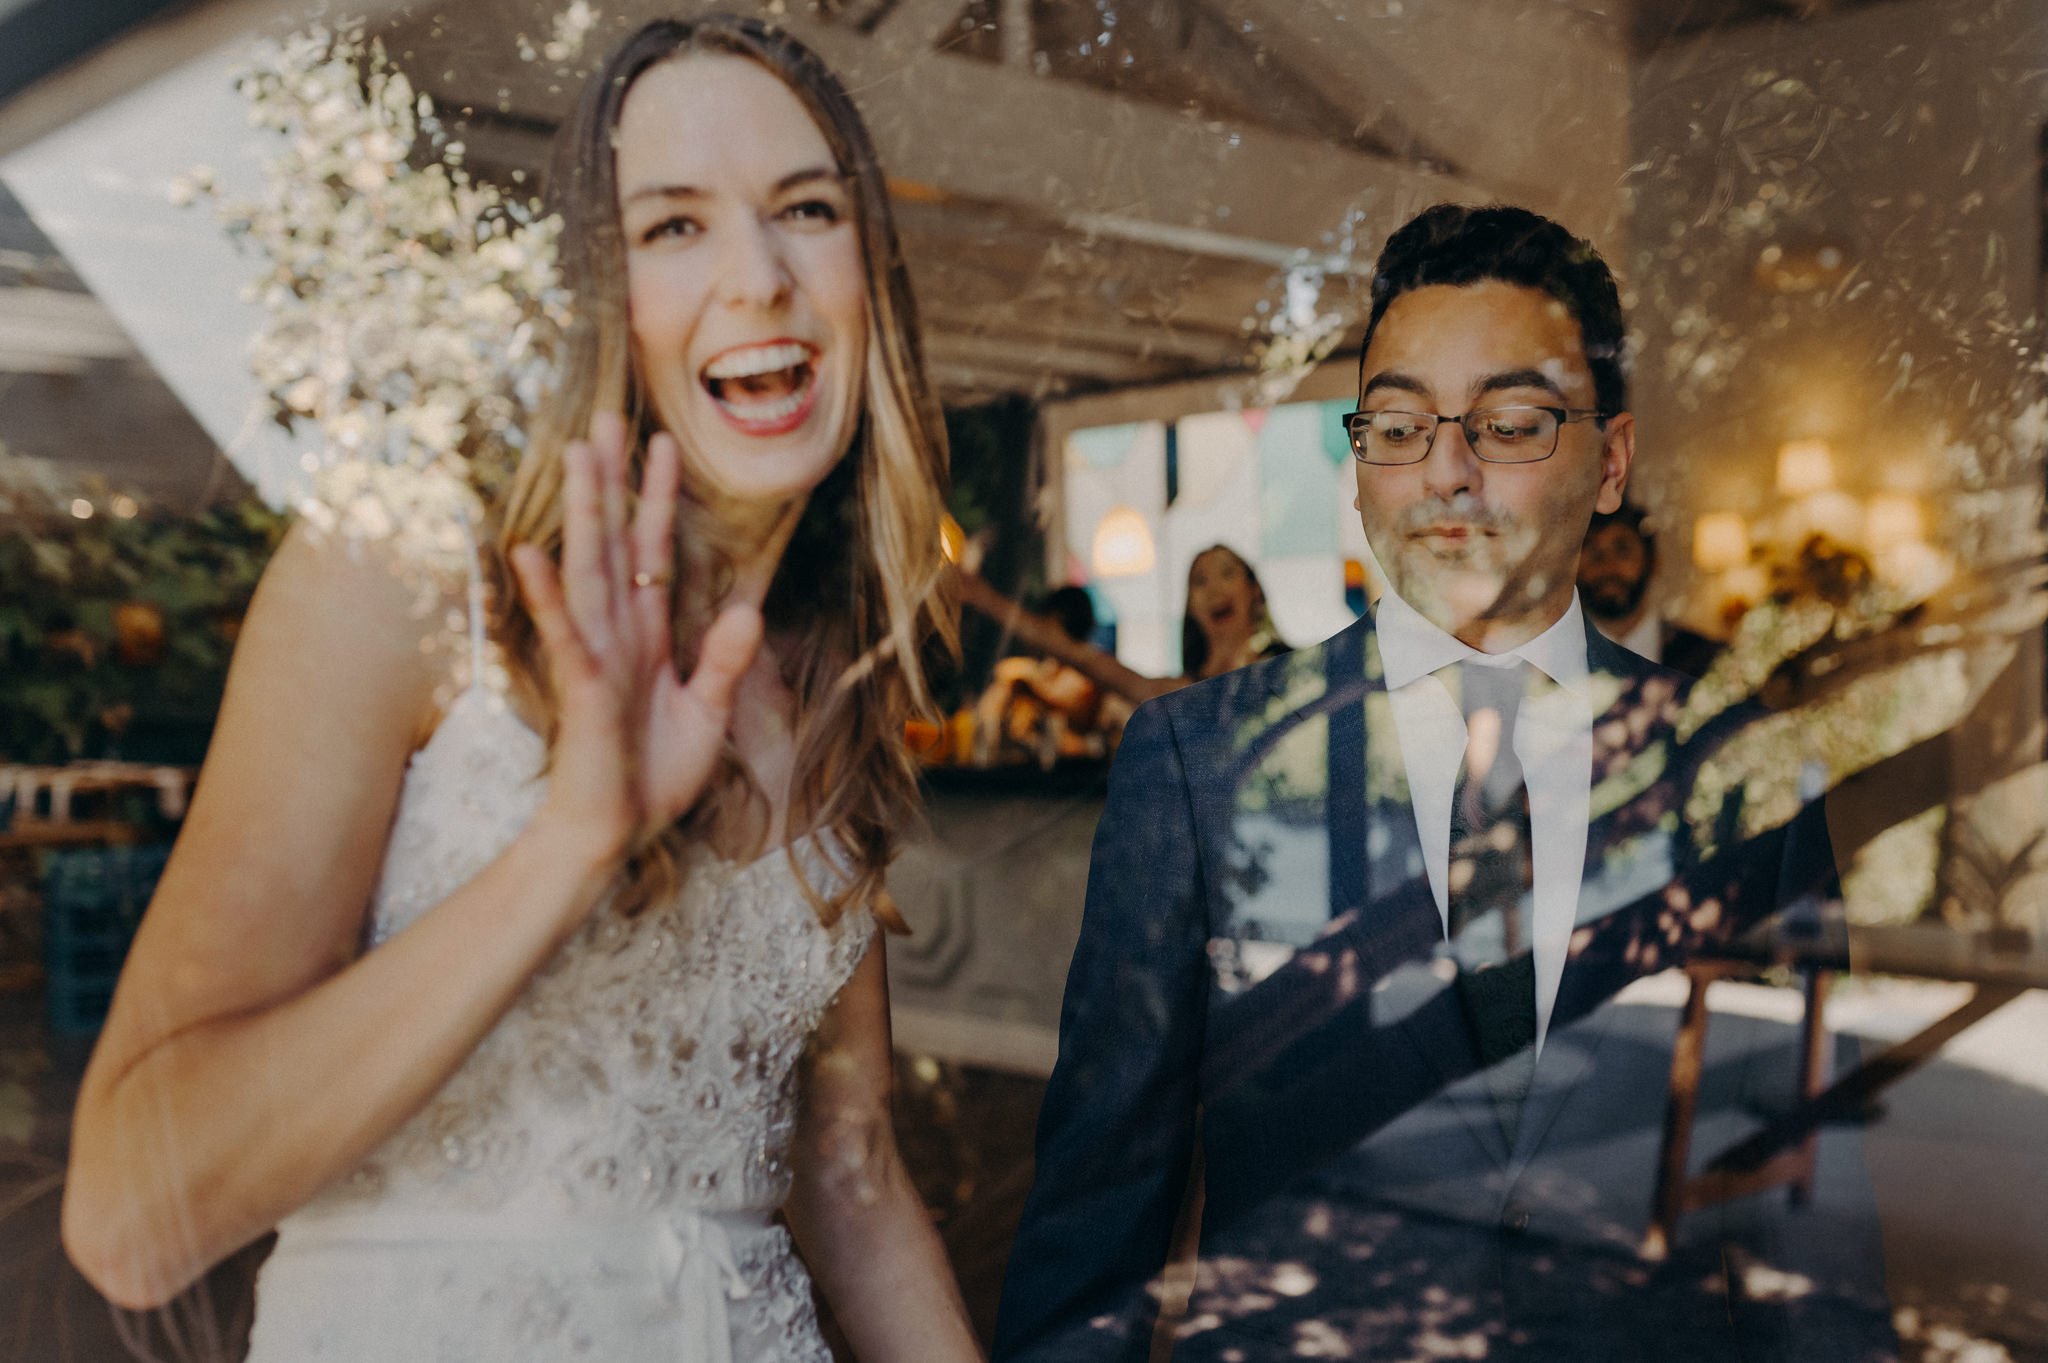 the fig house wedding - queer wedding photographers in los angeles - itlaphoto.com-30.jpg